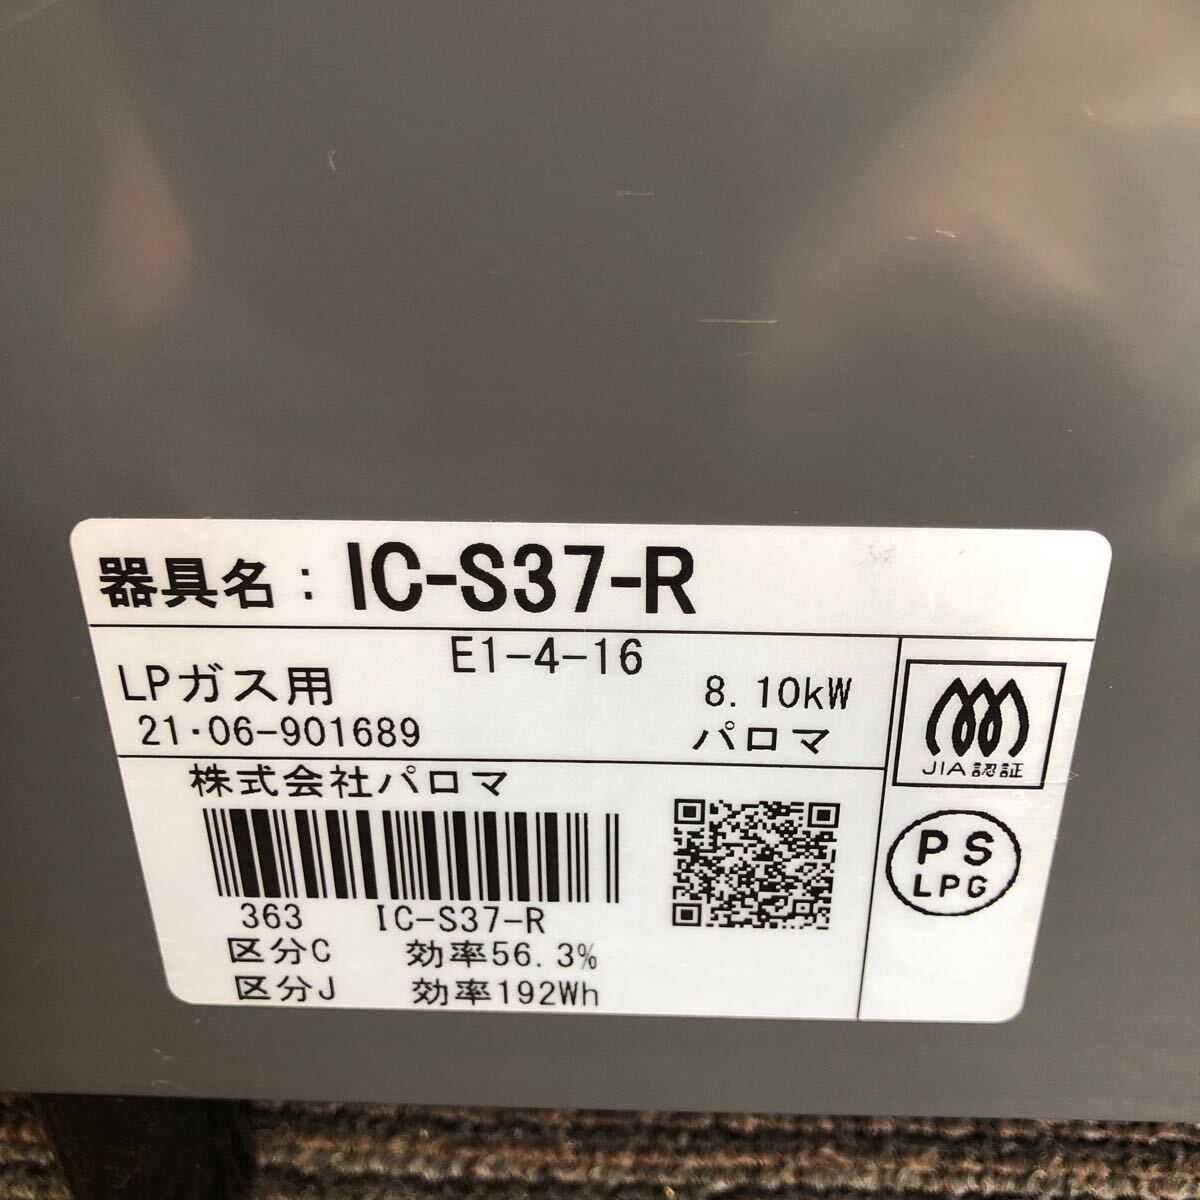 [ present condition goods ]5-18 Palomaparoma gas-stove LP gas IC-S37-R 2021 year made black 2. grill attaching right a little over heating power gas portable cooking stove manual attaching with defect 